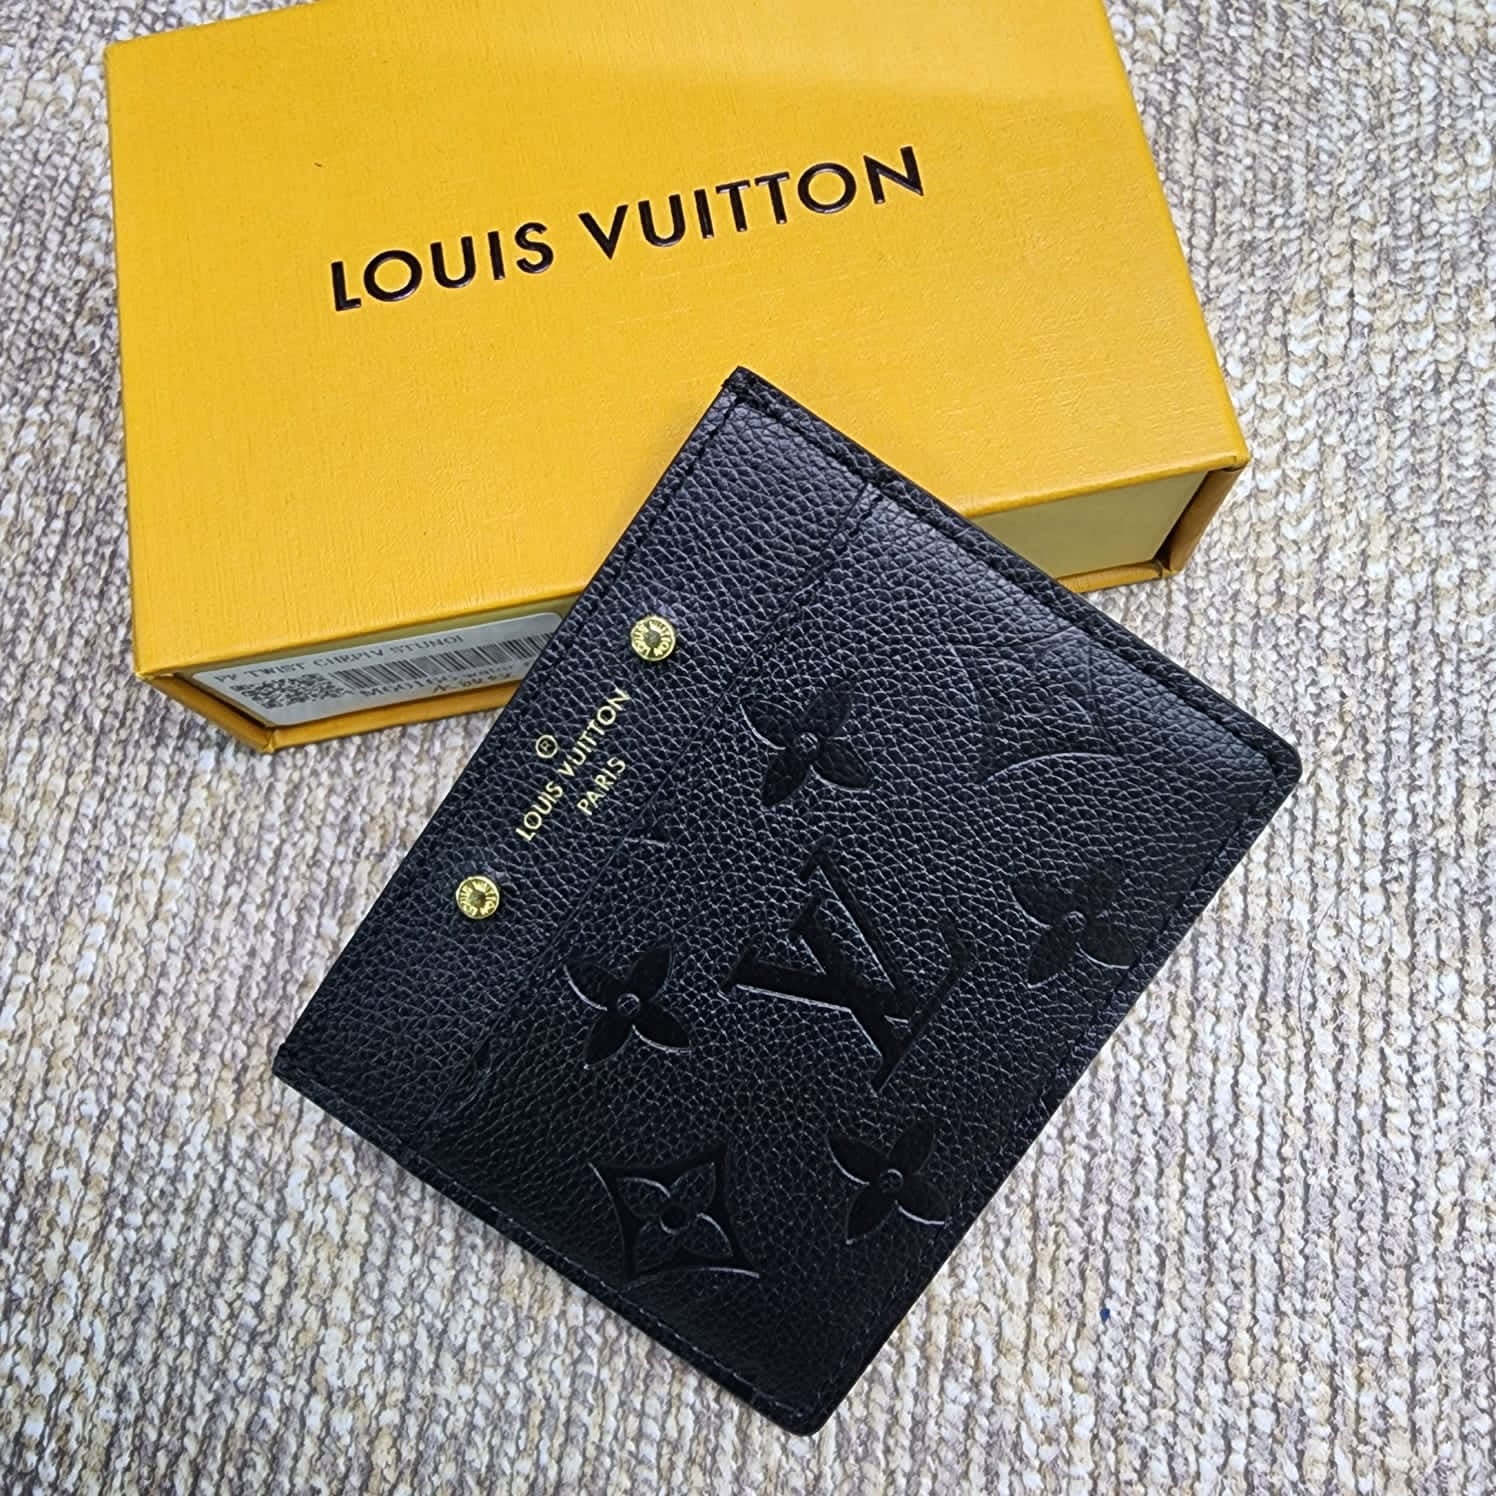 How To Open Louis Vuitton Card Holder